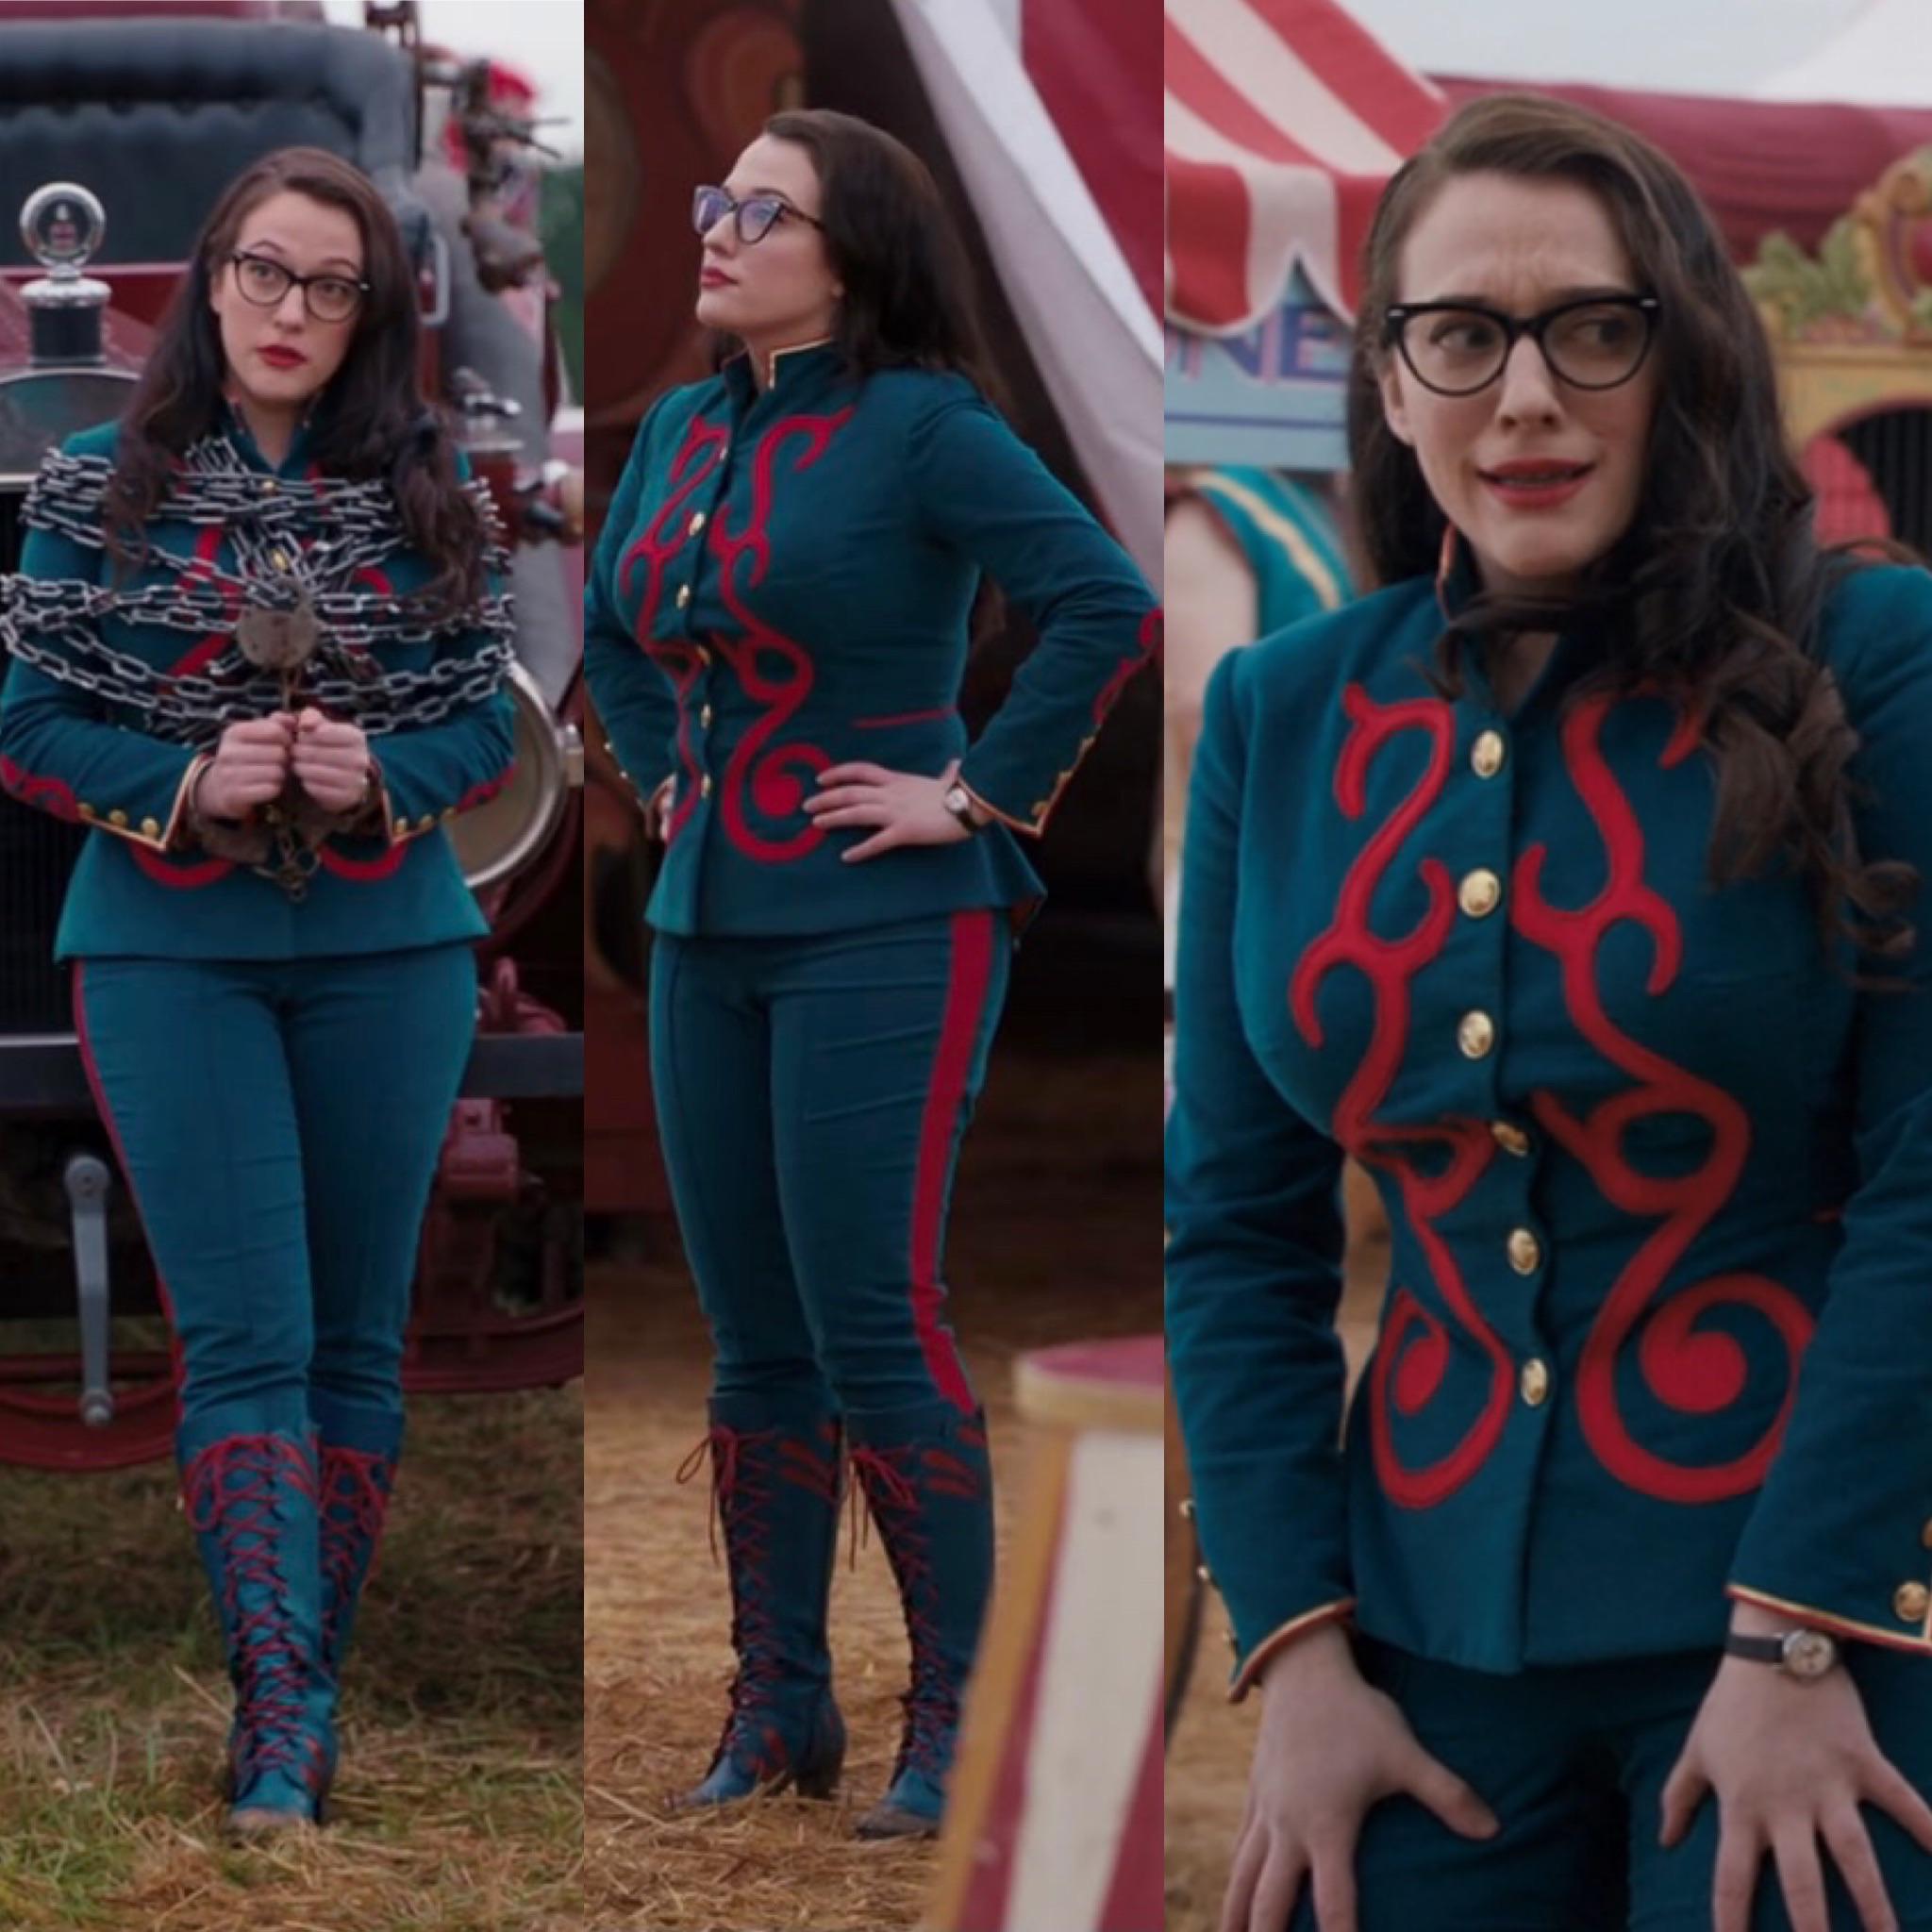 Cant stop thinking of Kat Dennings thicc thighs in this